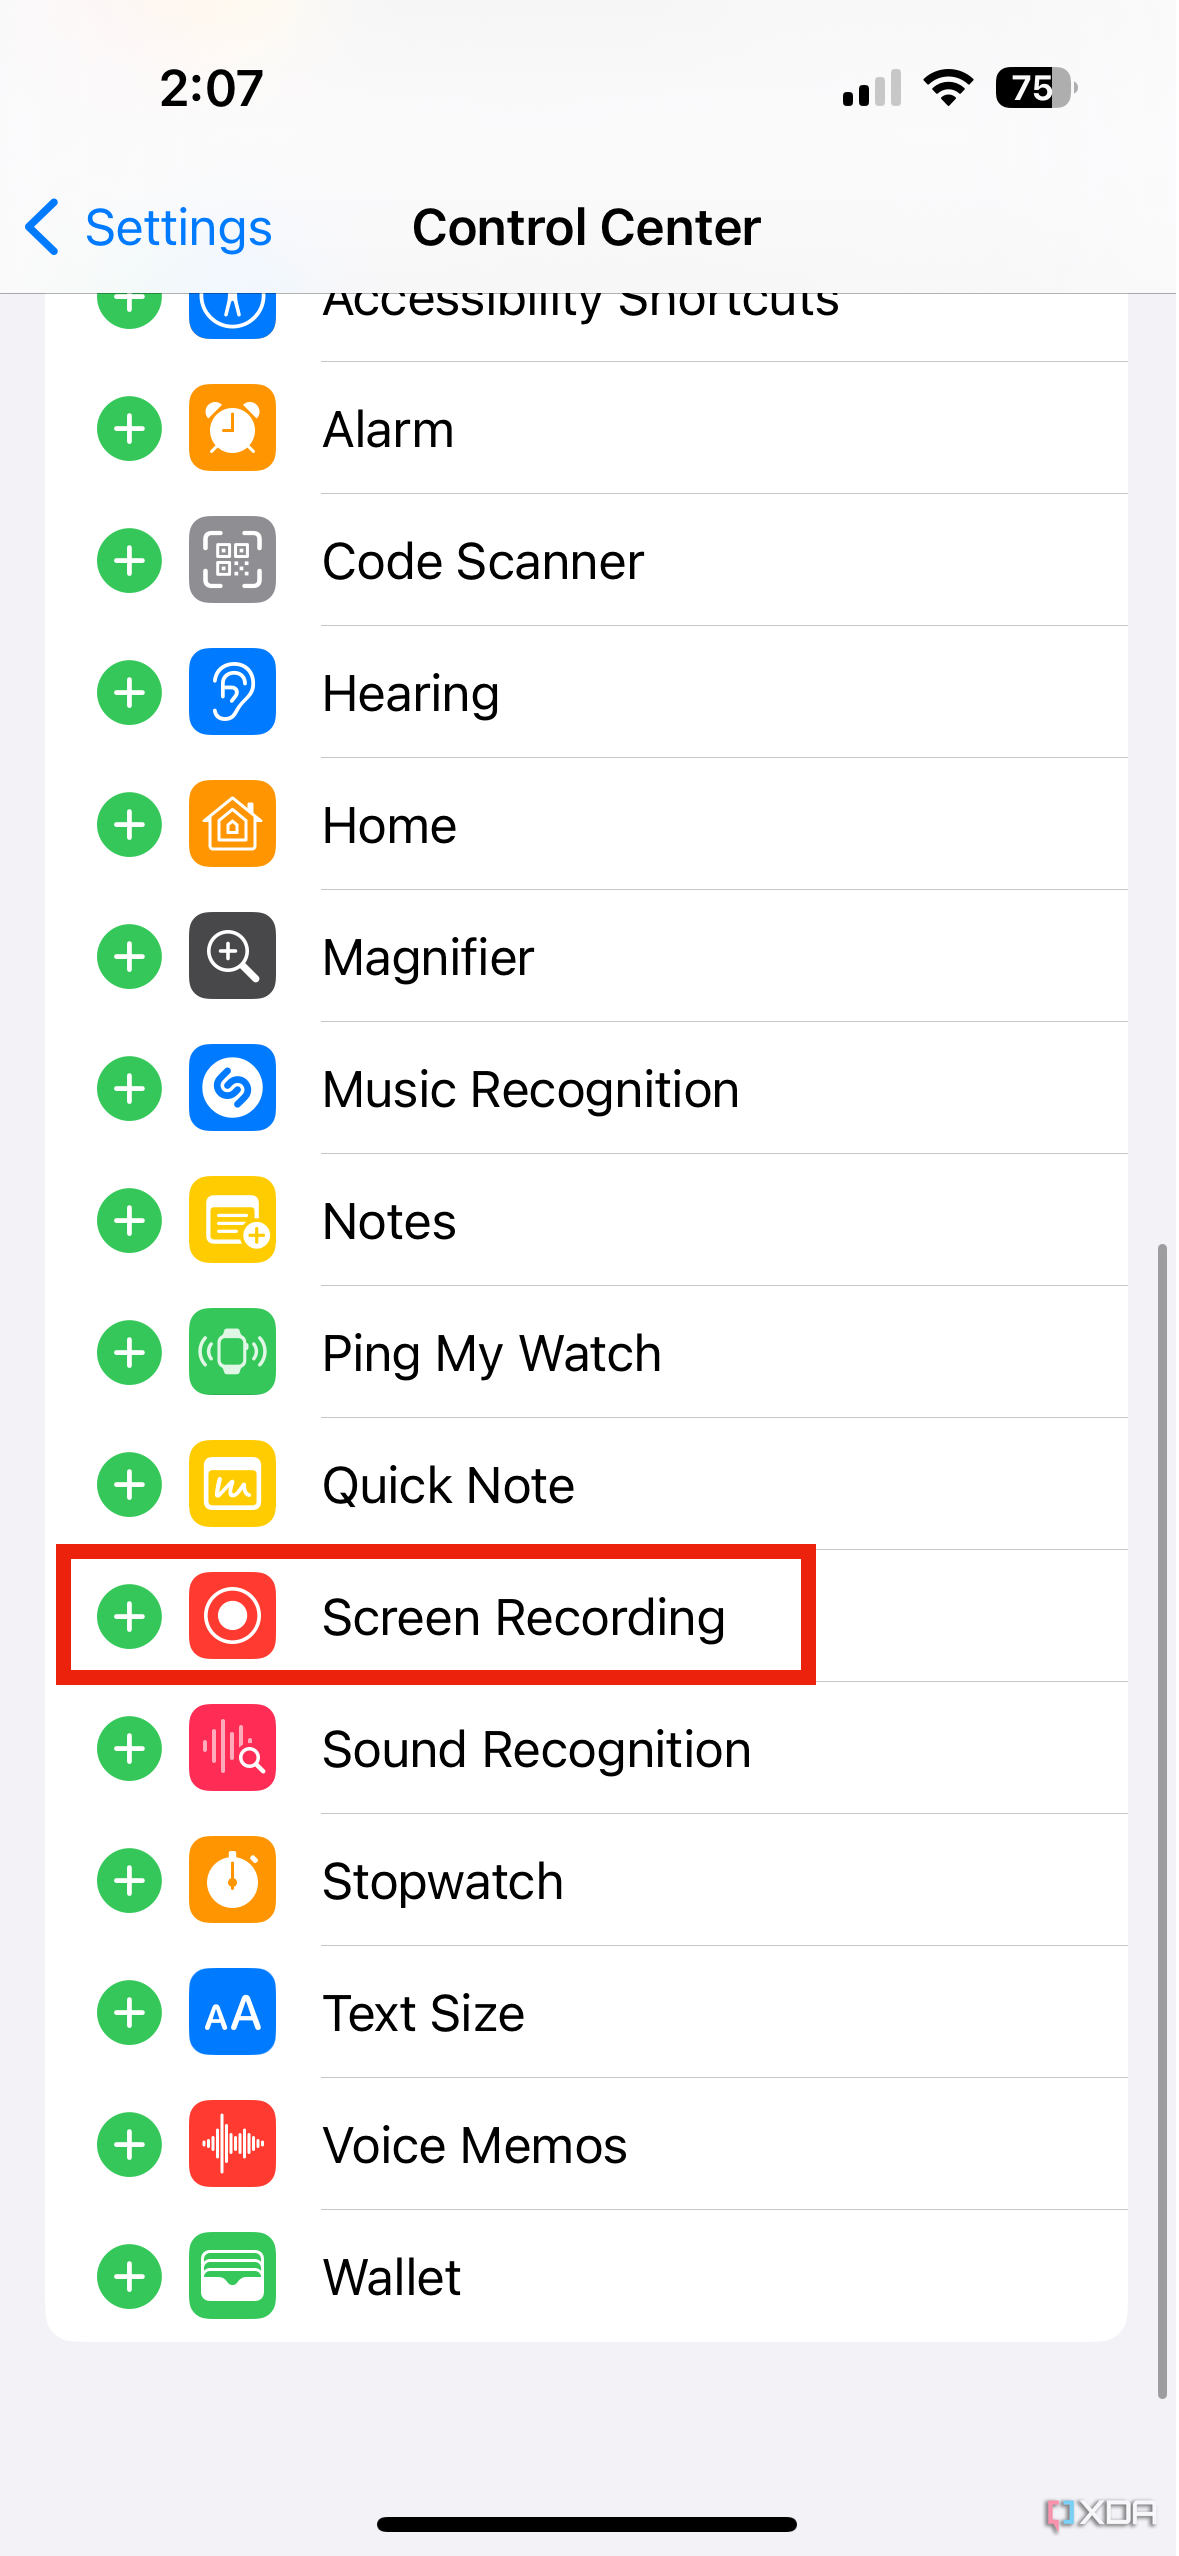 The screen recording toggle in the Settings app for Control Center.